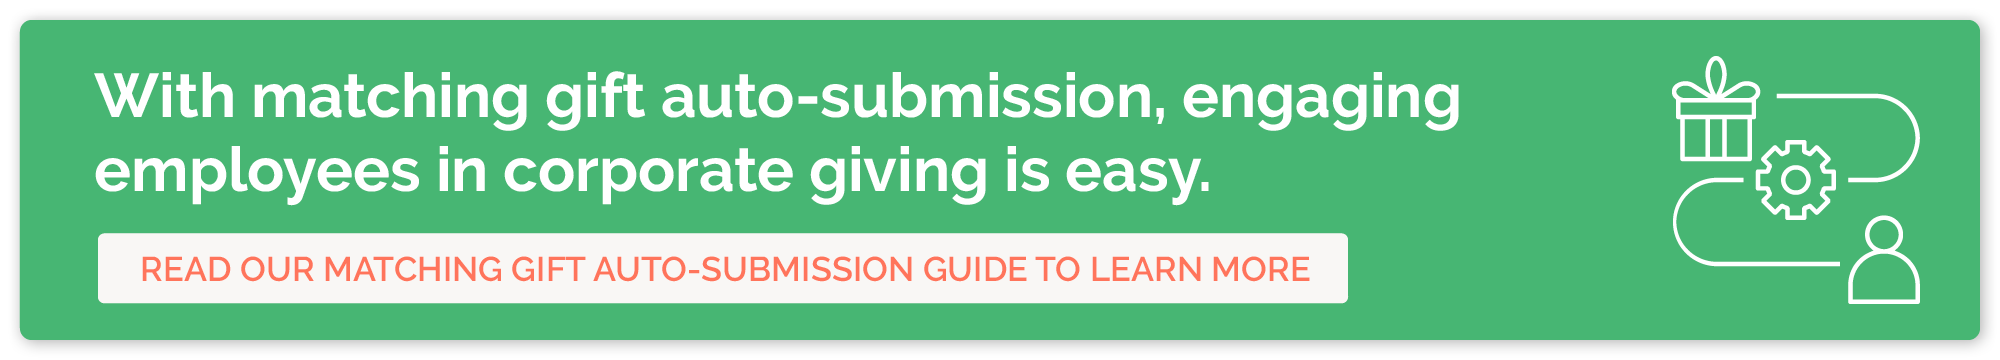 With matching gift auto-submission, engaging employees is easy. Click here to learn more about auto-submission. 